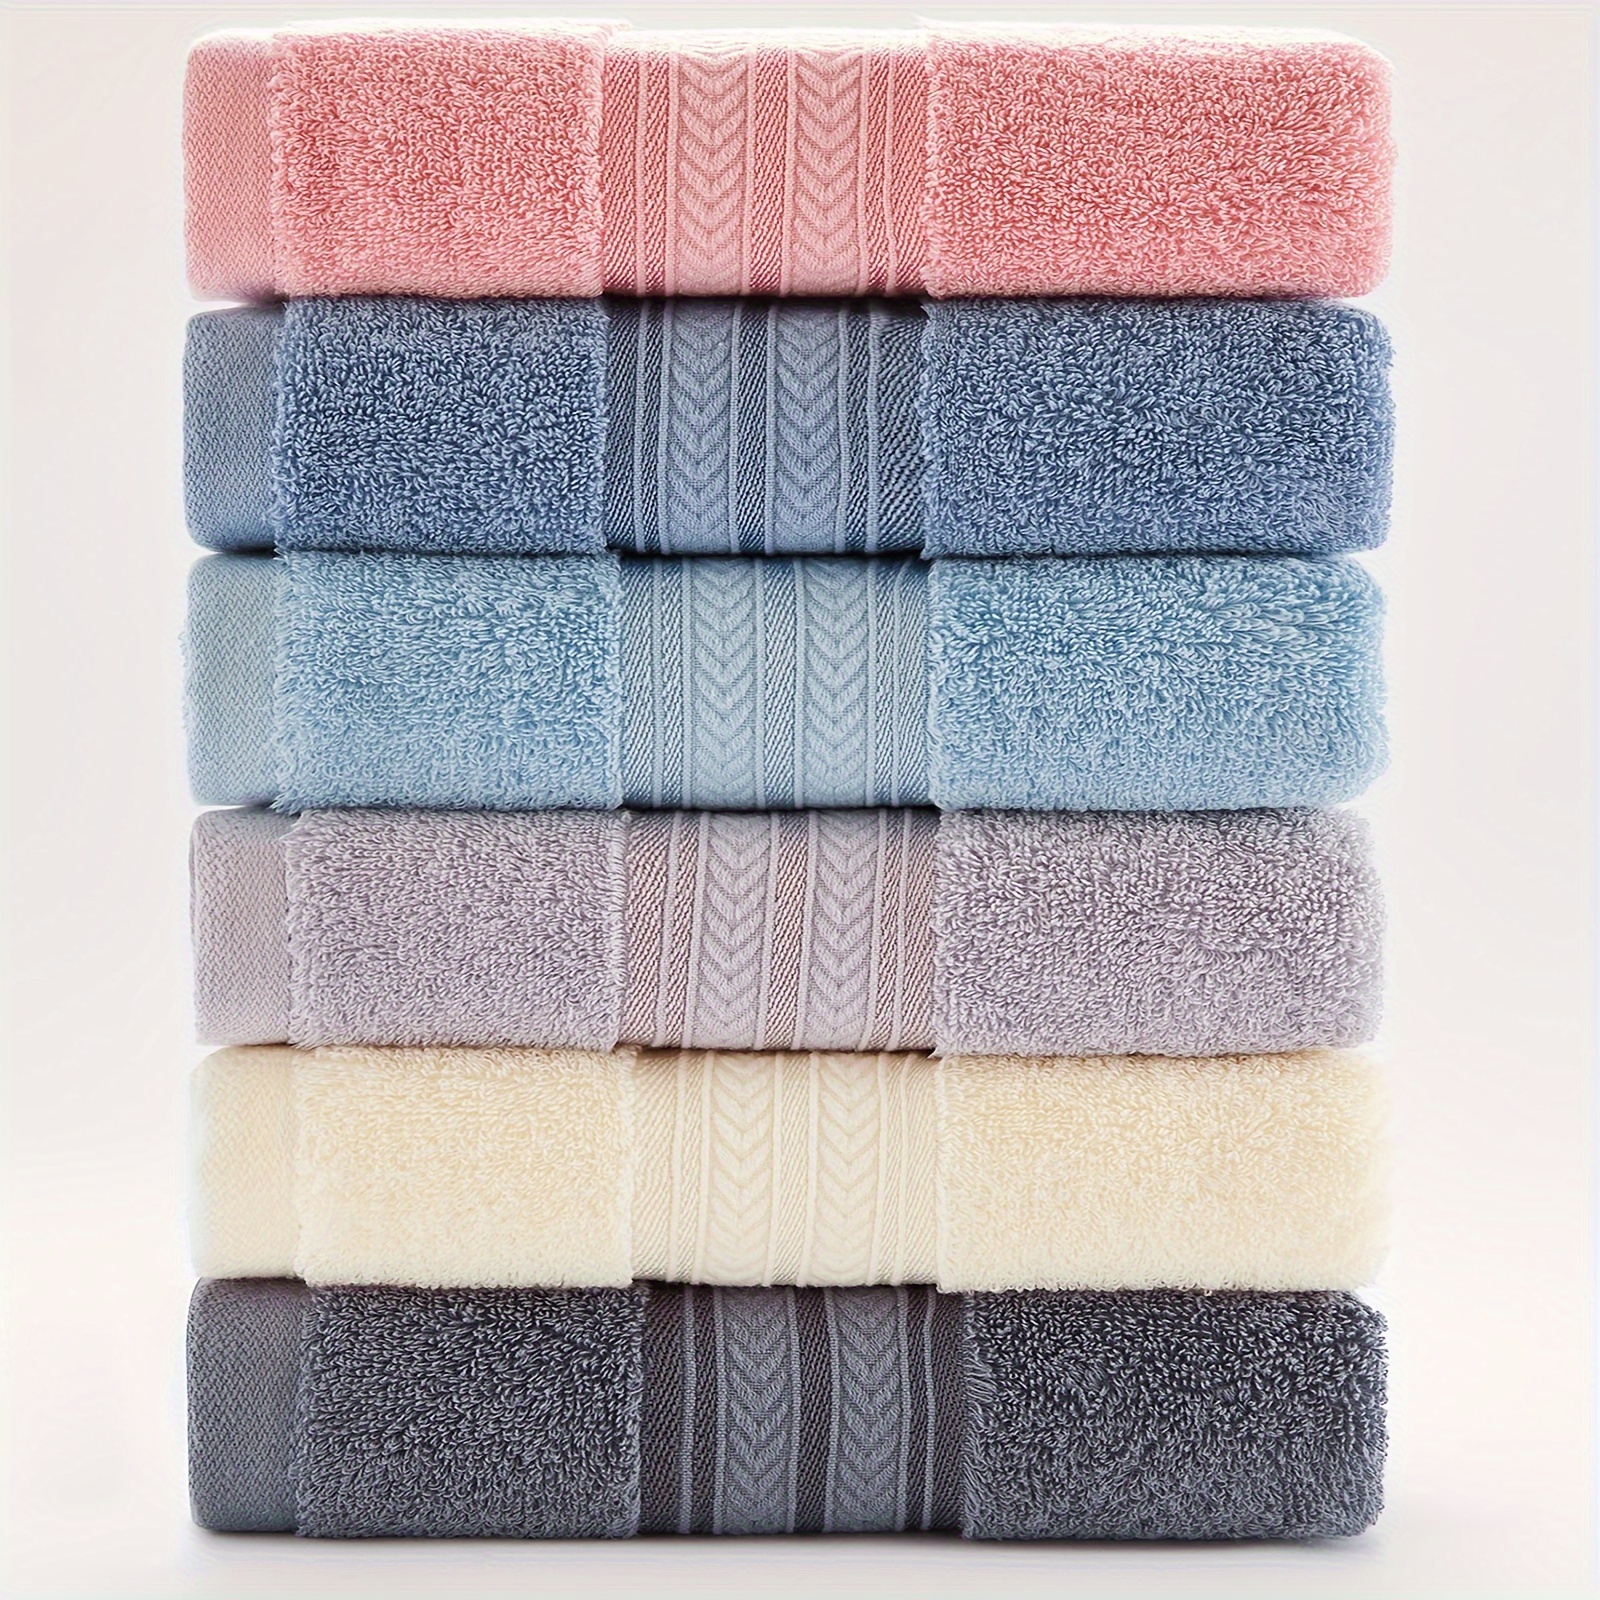 

6pcs Cotton Towel Set, Absorbent & Quick-drying Face Towel, Super Soft & Thickened Bathing Towel, For Home Bathroom, Ideal Bathroom Supplies